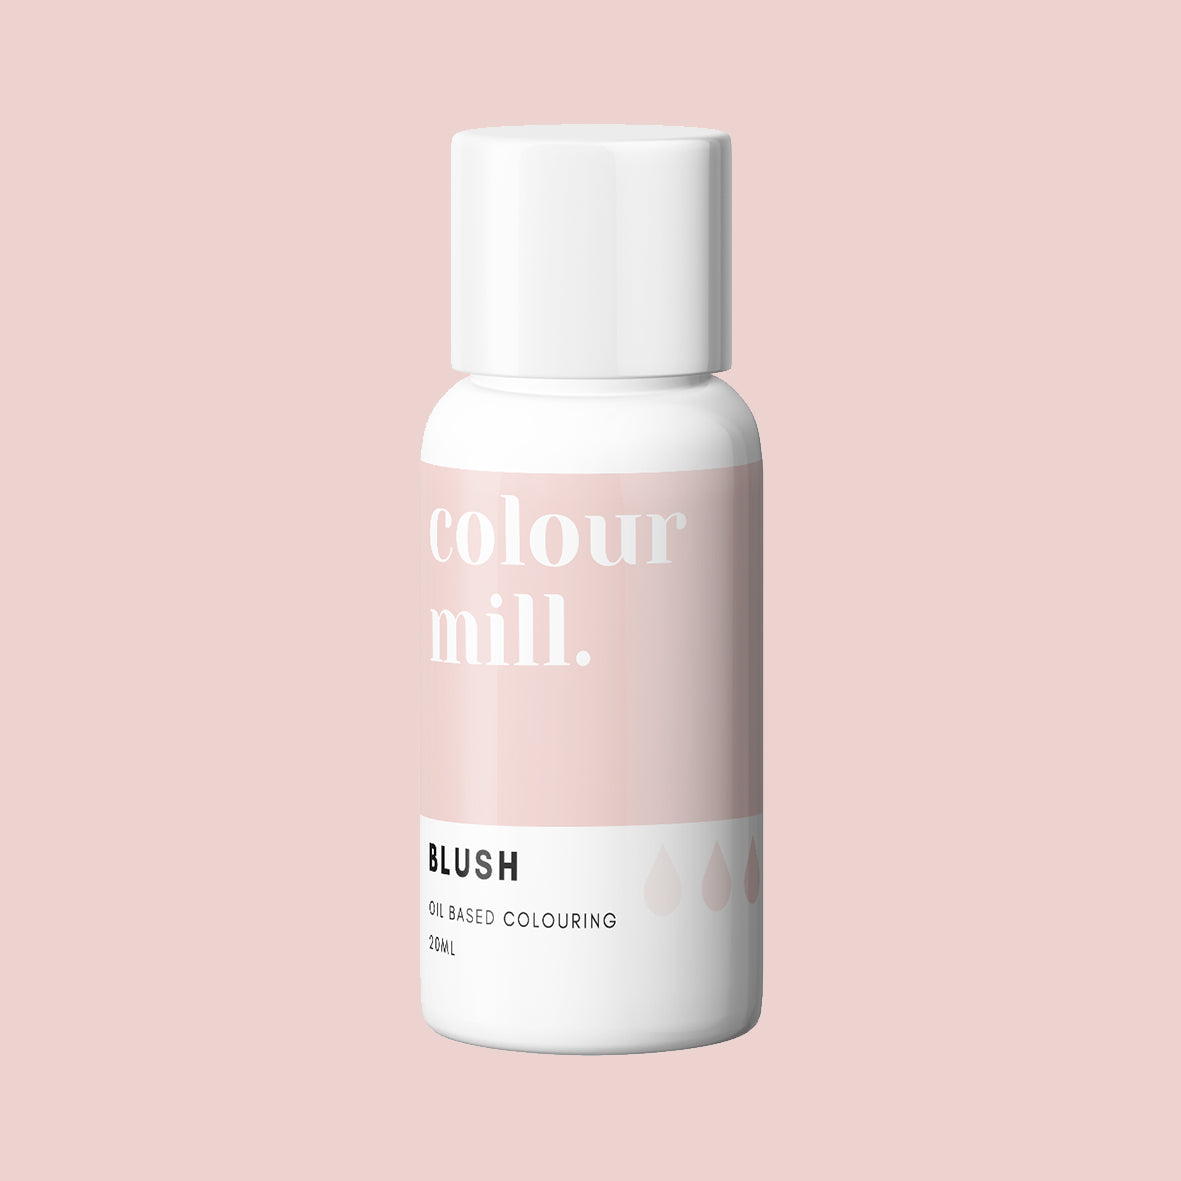 BLUSH oil based concentrated icing colouring 20ml